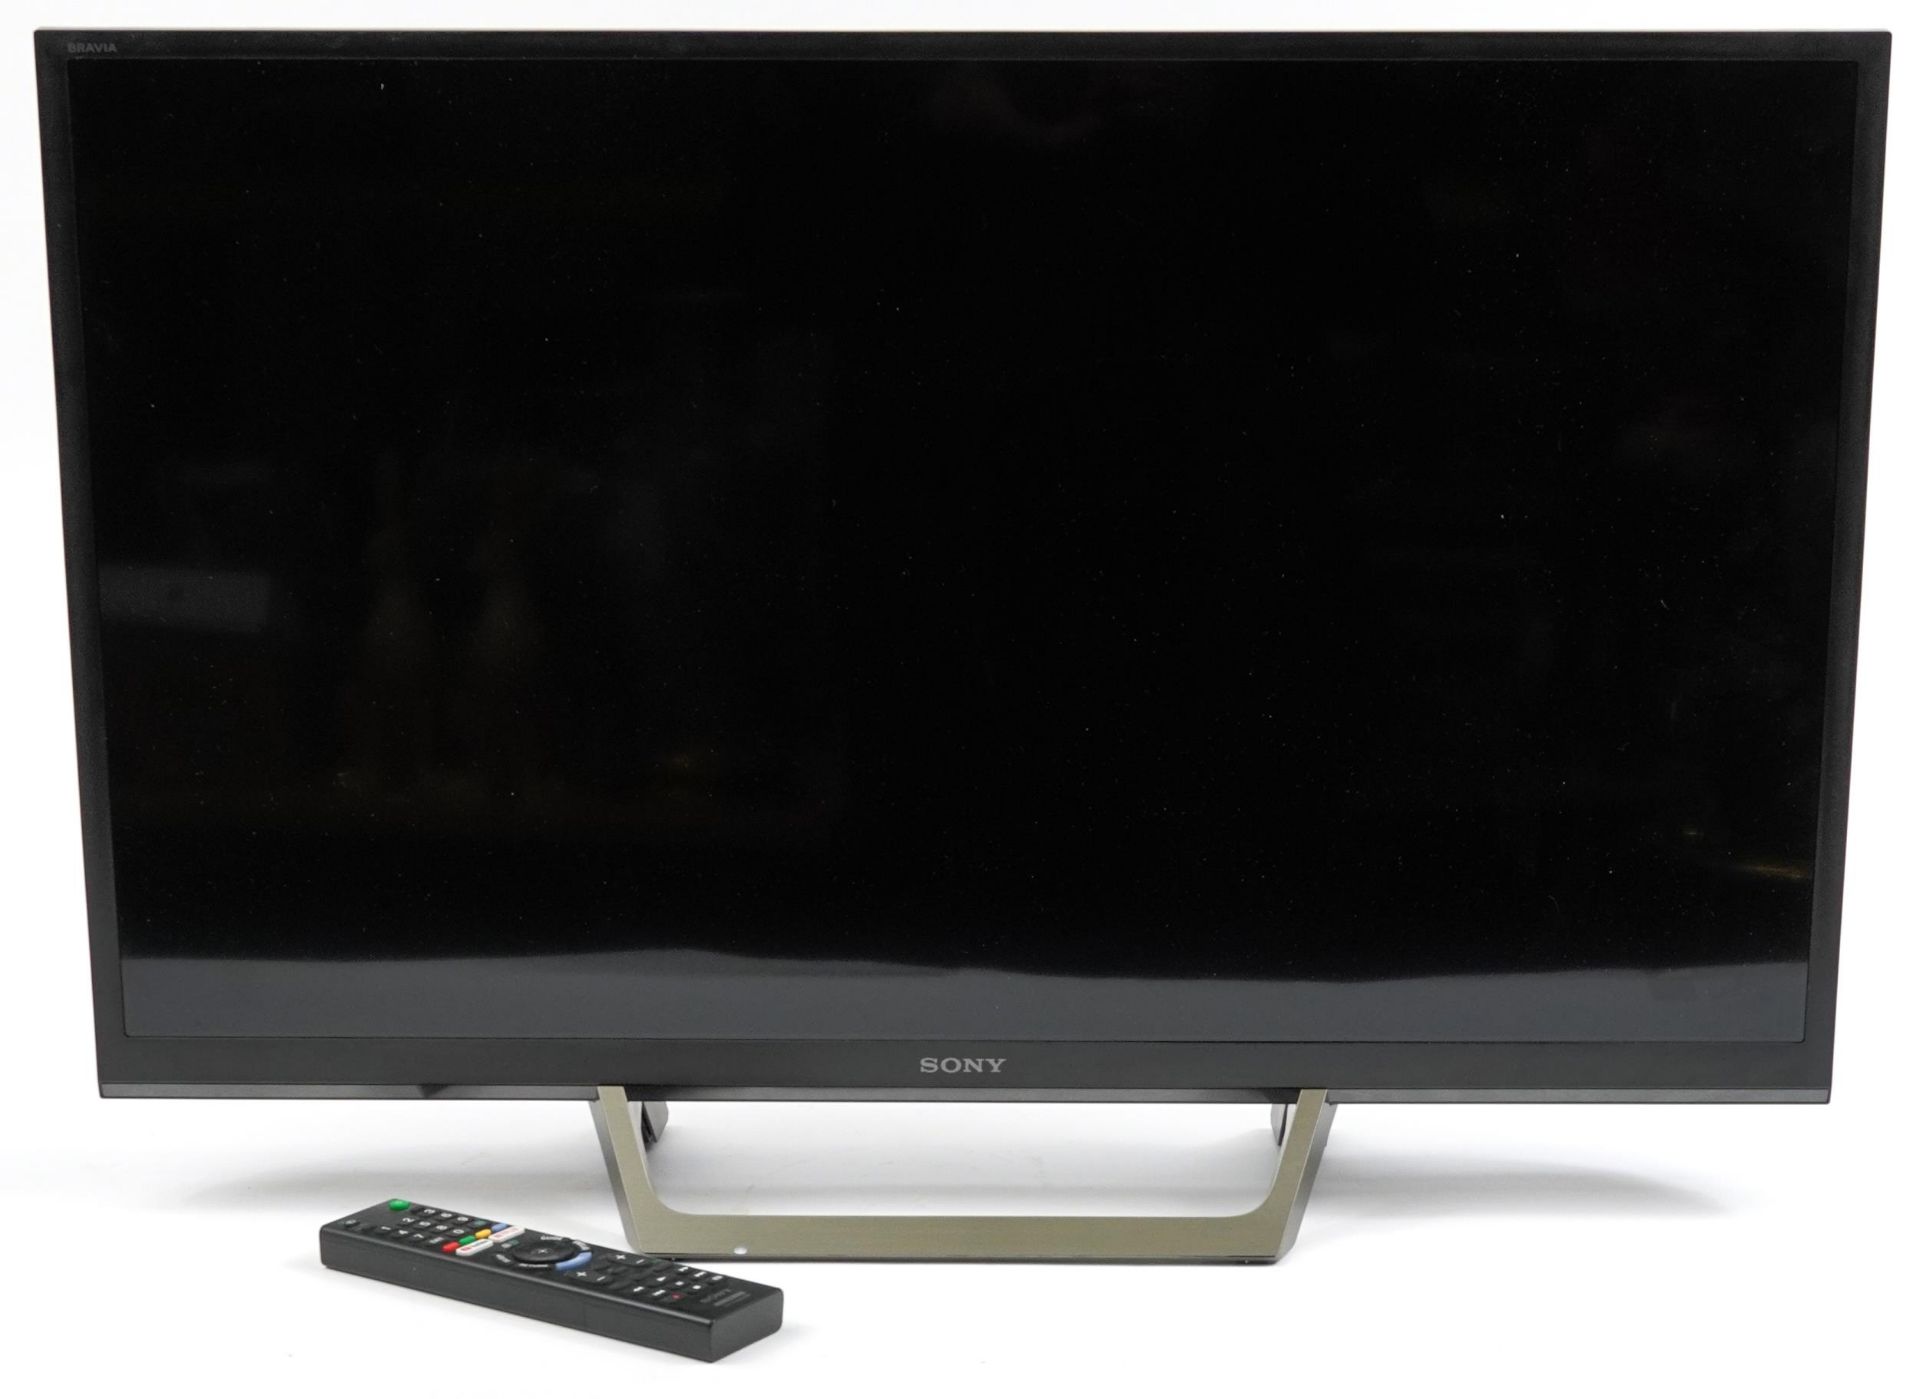 Sony 32 inch LED television with remote, model KDL-32WE613